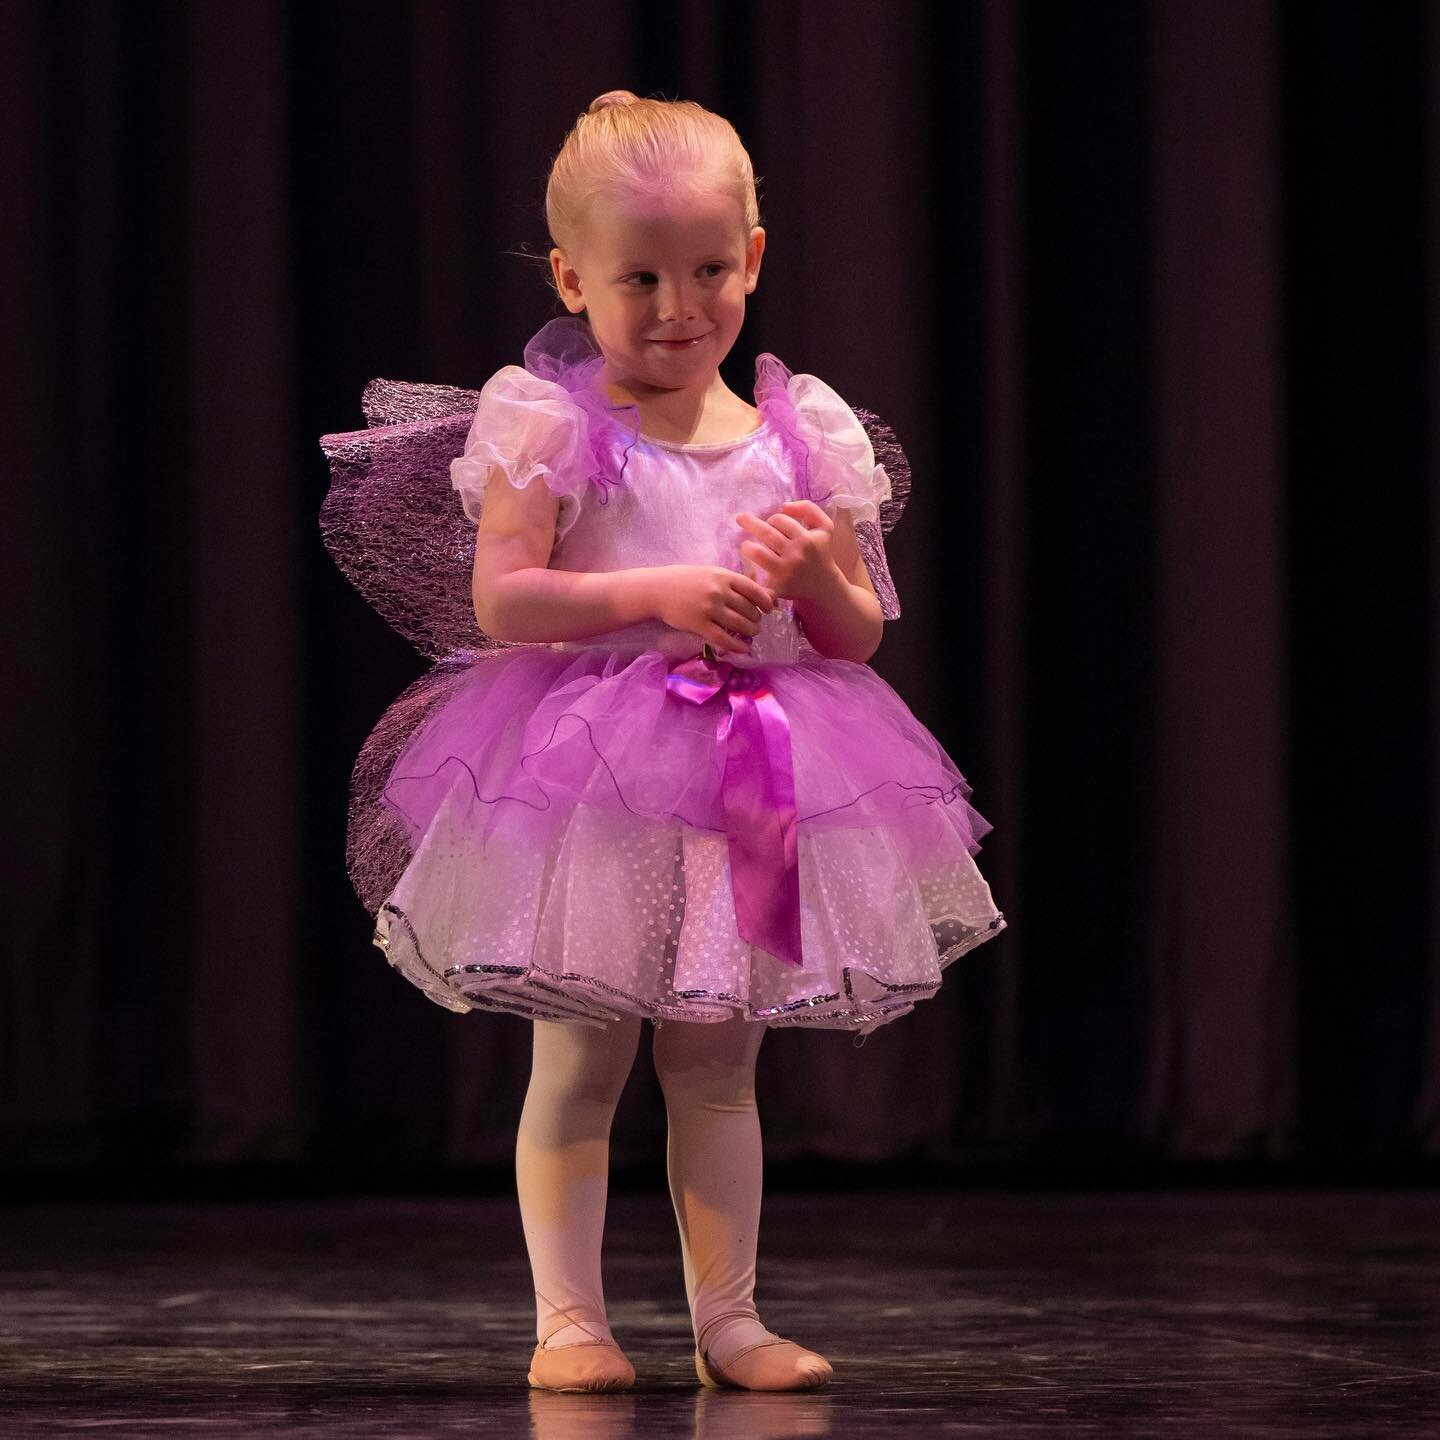 It&rsquo;s recital day! And we can&rsquo;t wait to share it with you. 
.
Today&rsquo;s performance begins at 7 pm at Place des Arts (downtown Sudbury). Doors will open at 6:30. 
.
We hope you will join us for a wonderful evening of dance! 
.
(Can&rsq